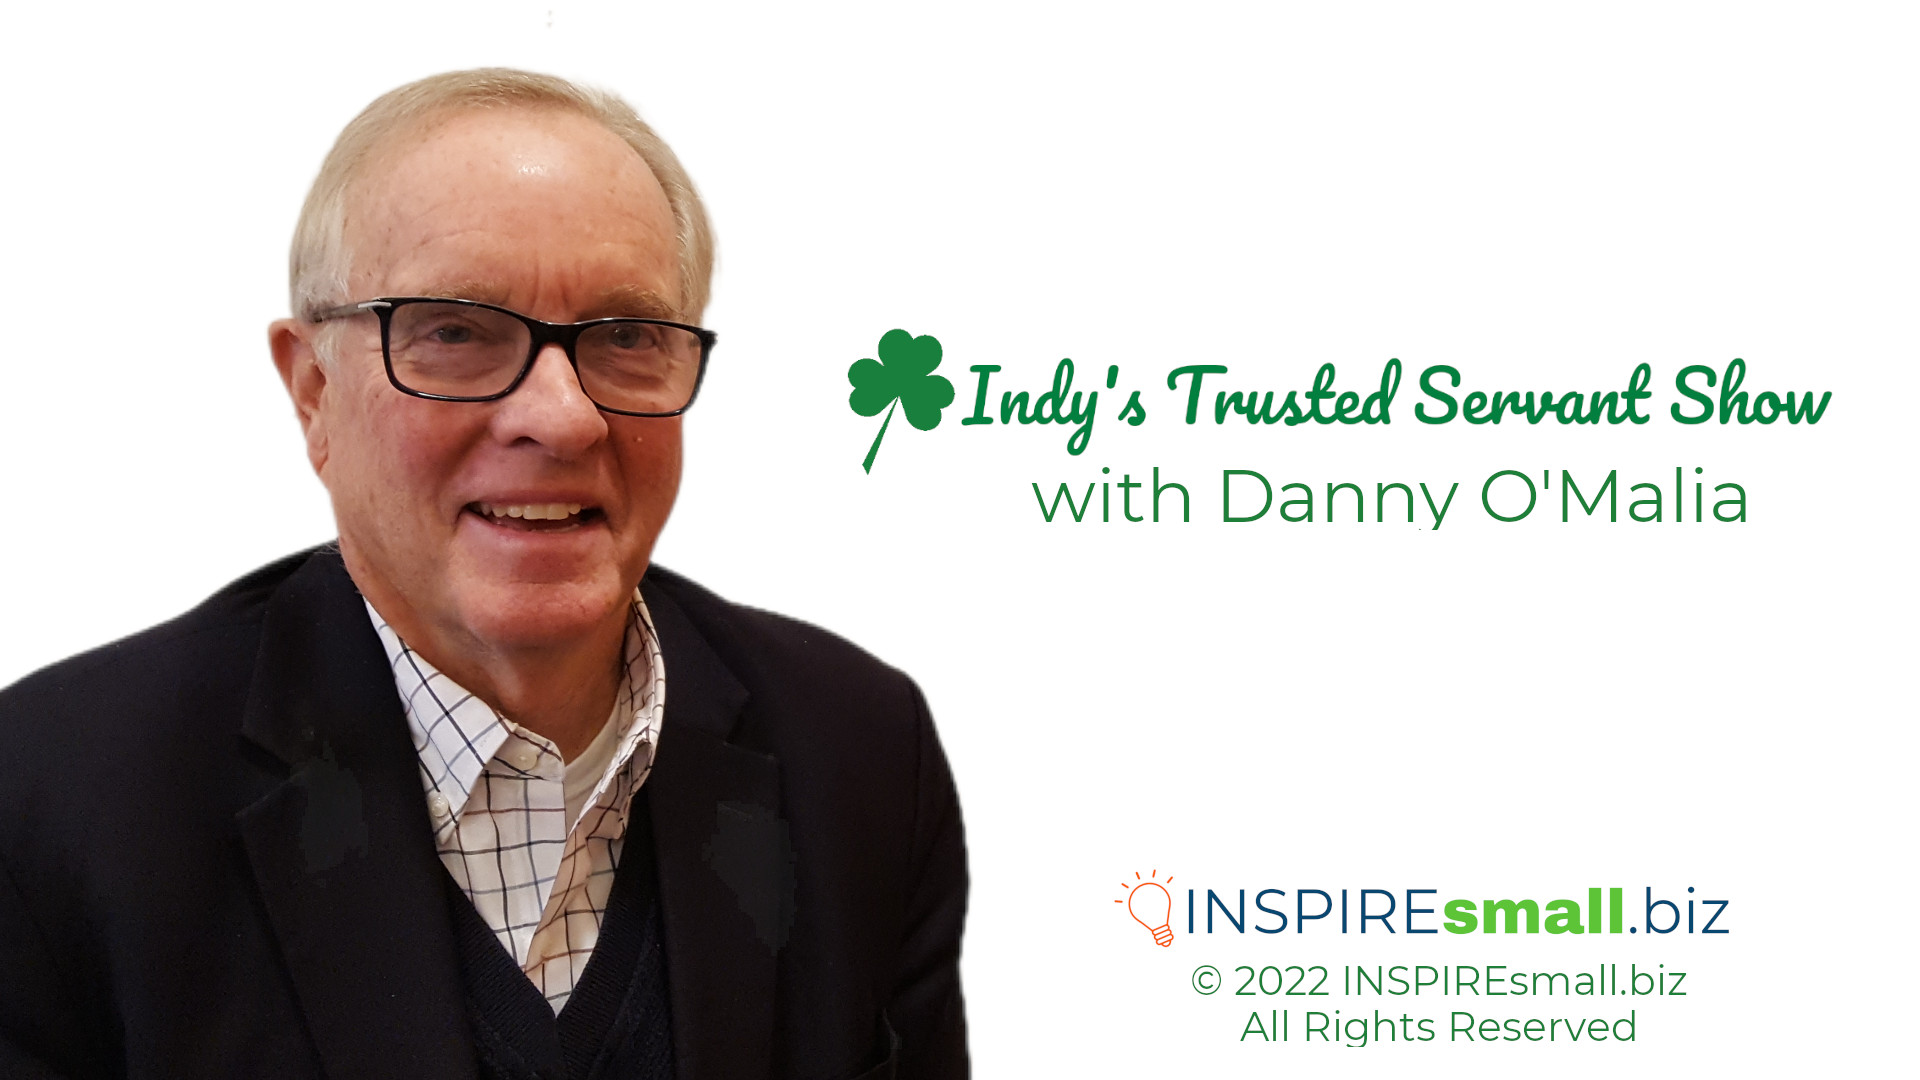 Watch the Indy’s Trusted Servant Show on INSPIREsmall.biz